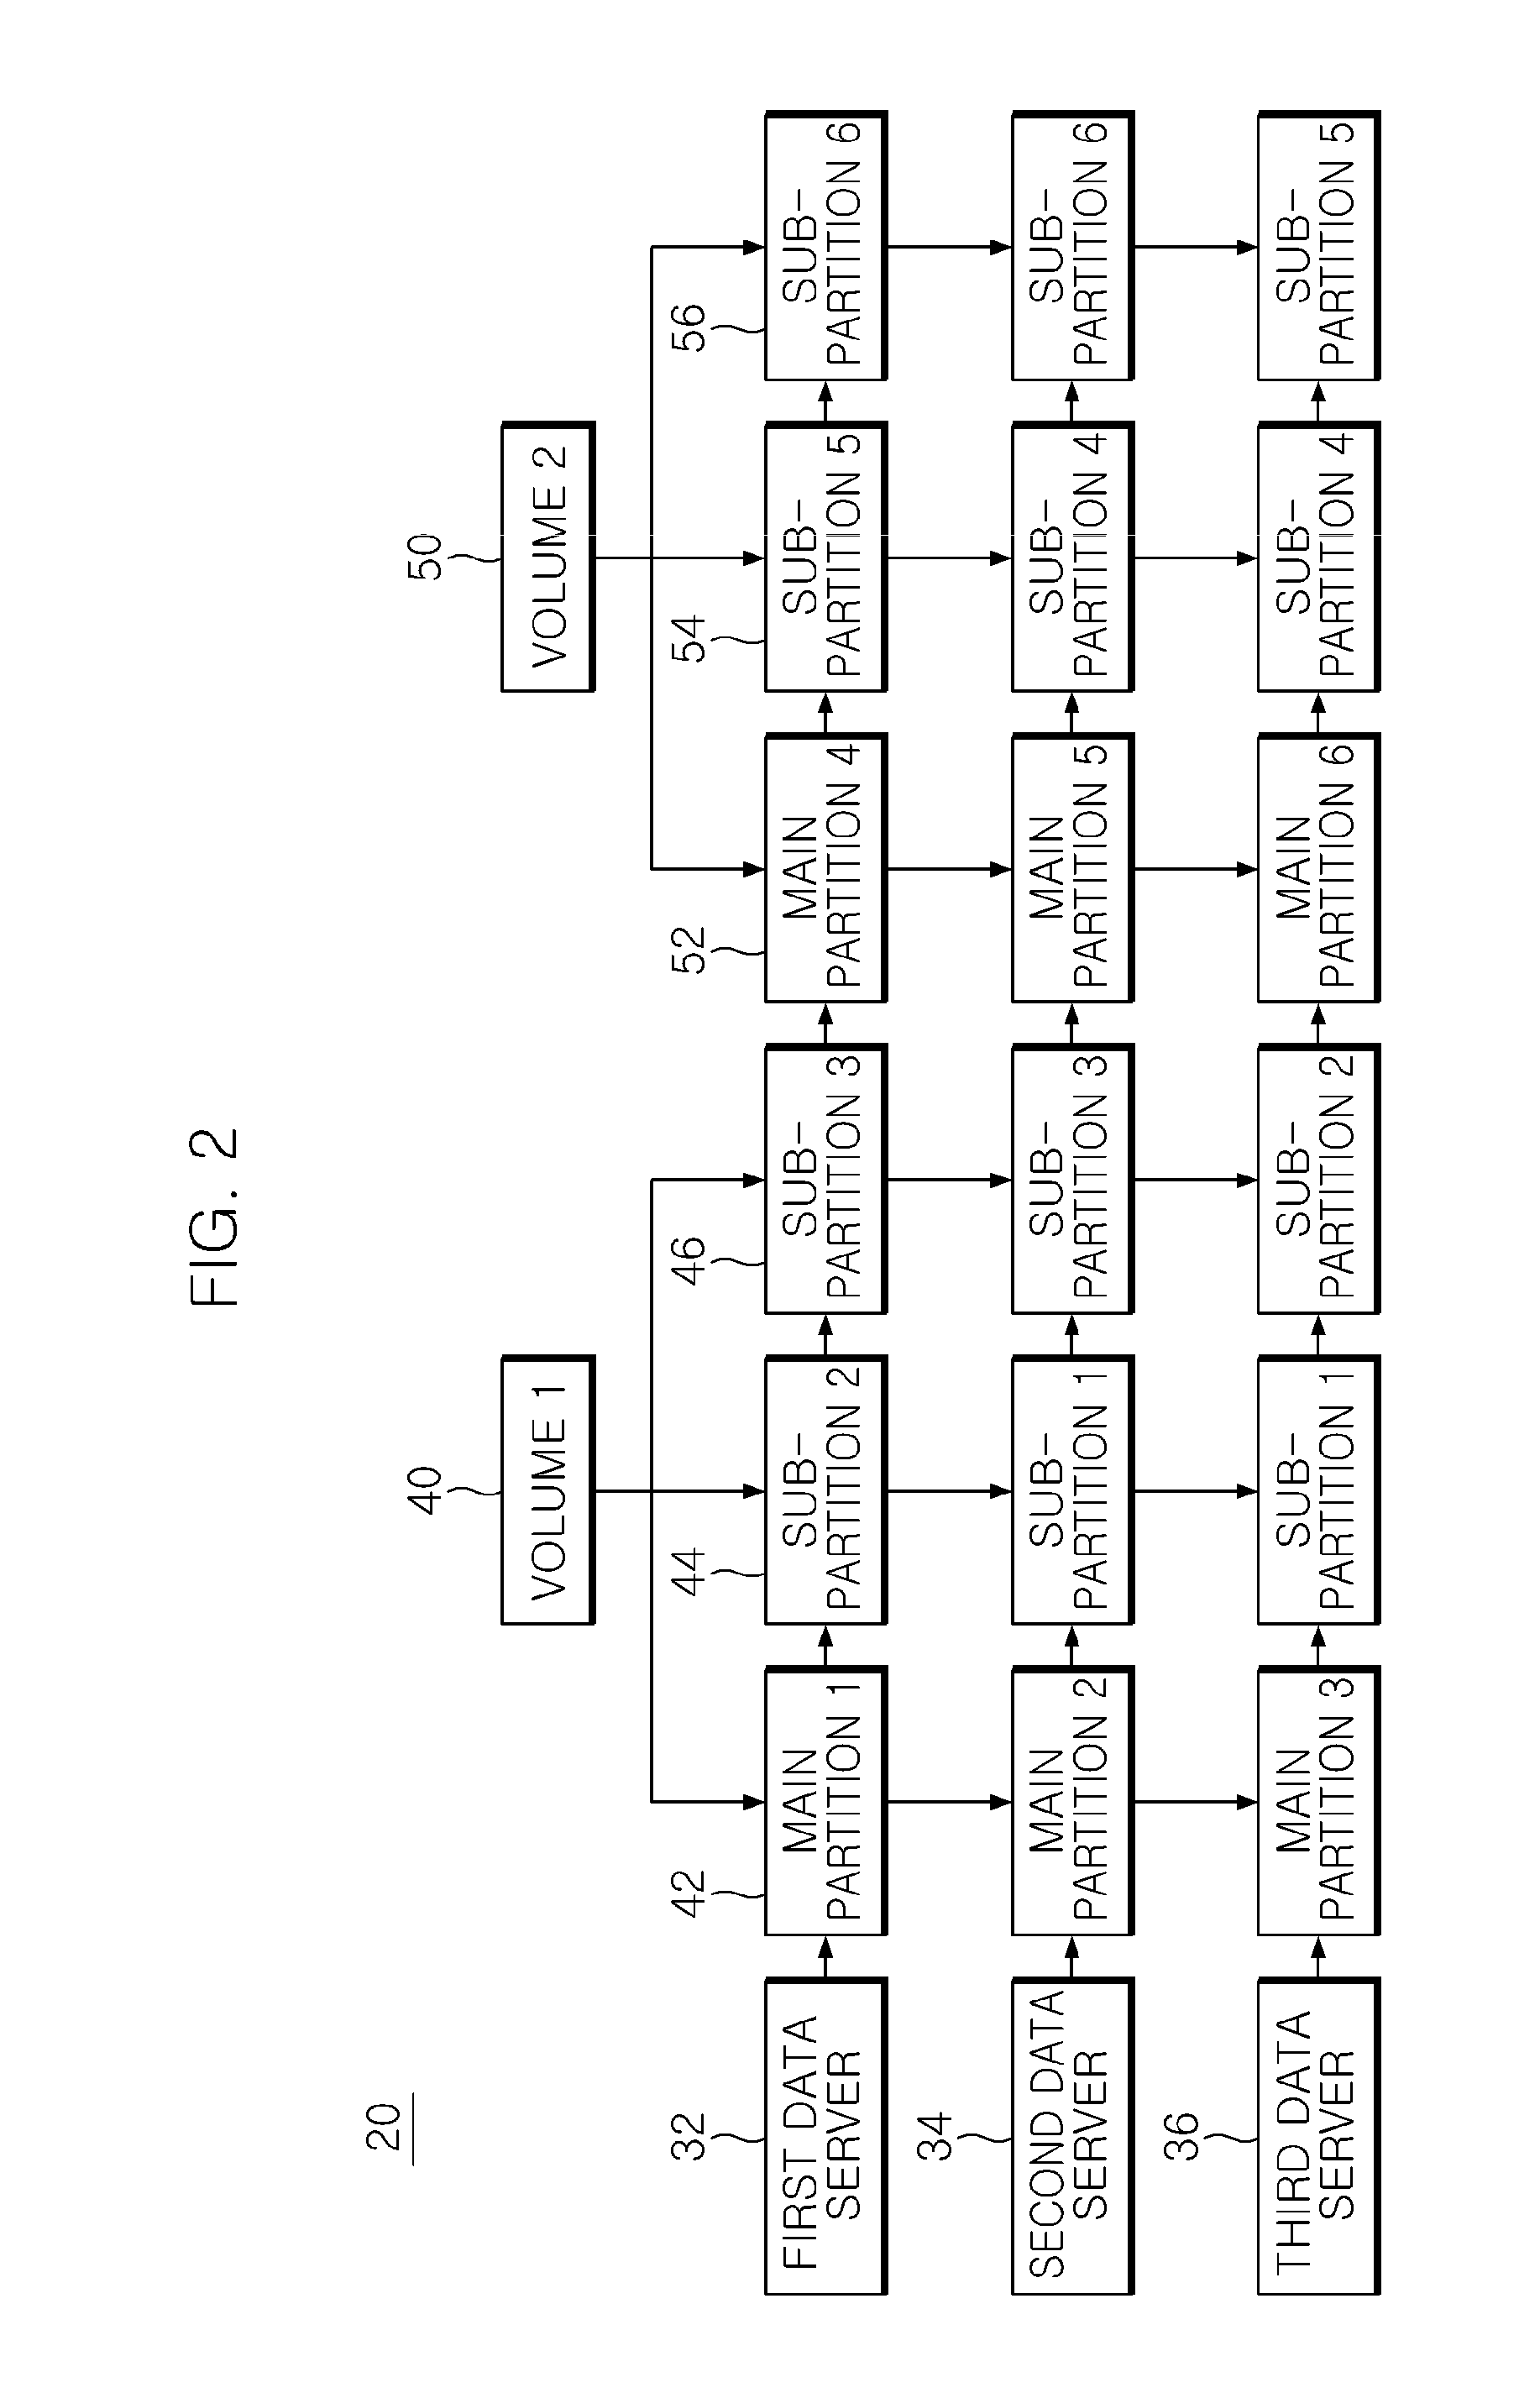 Data replication and recovery method in asymmetric clustered distributed file system